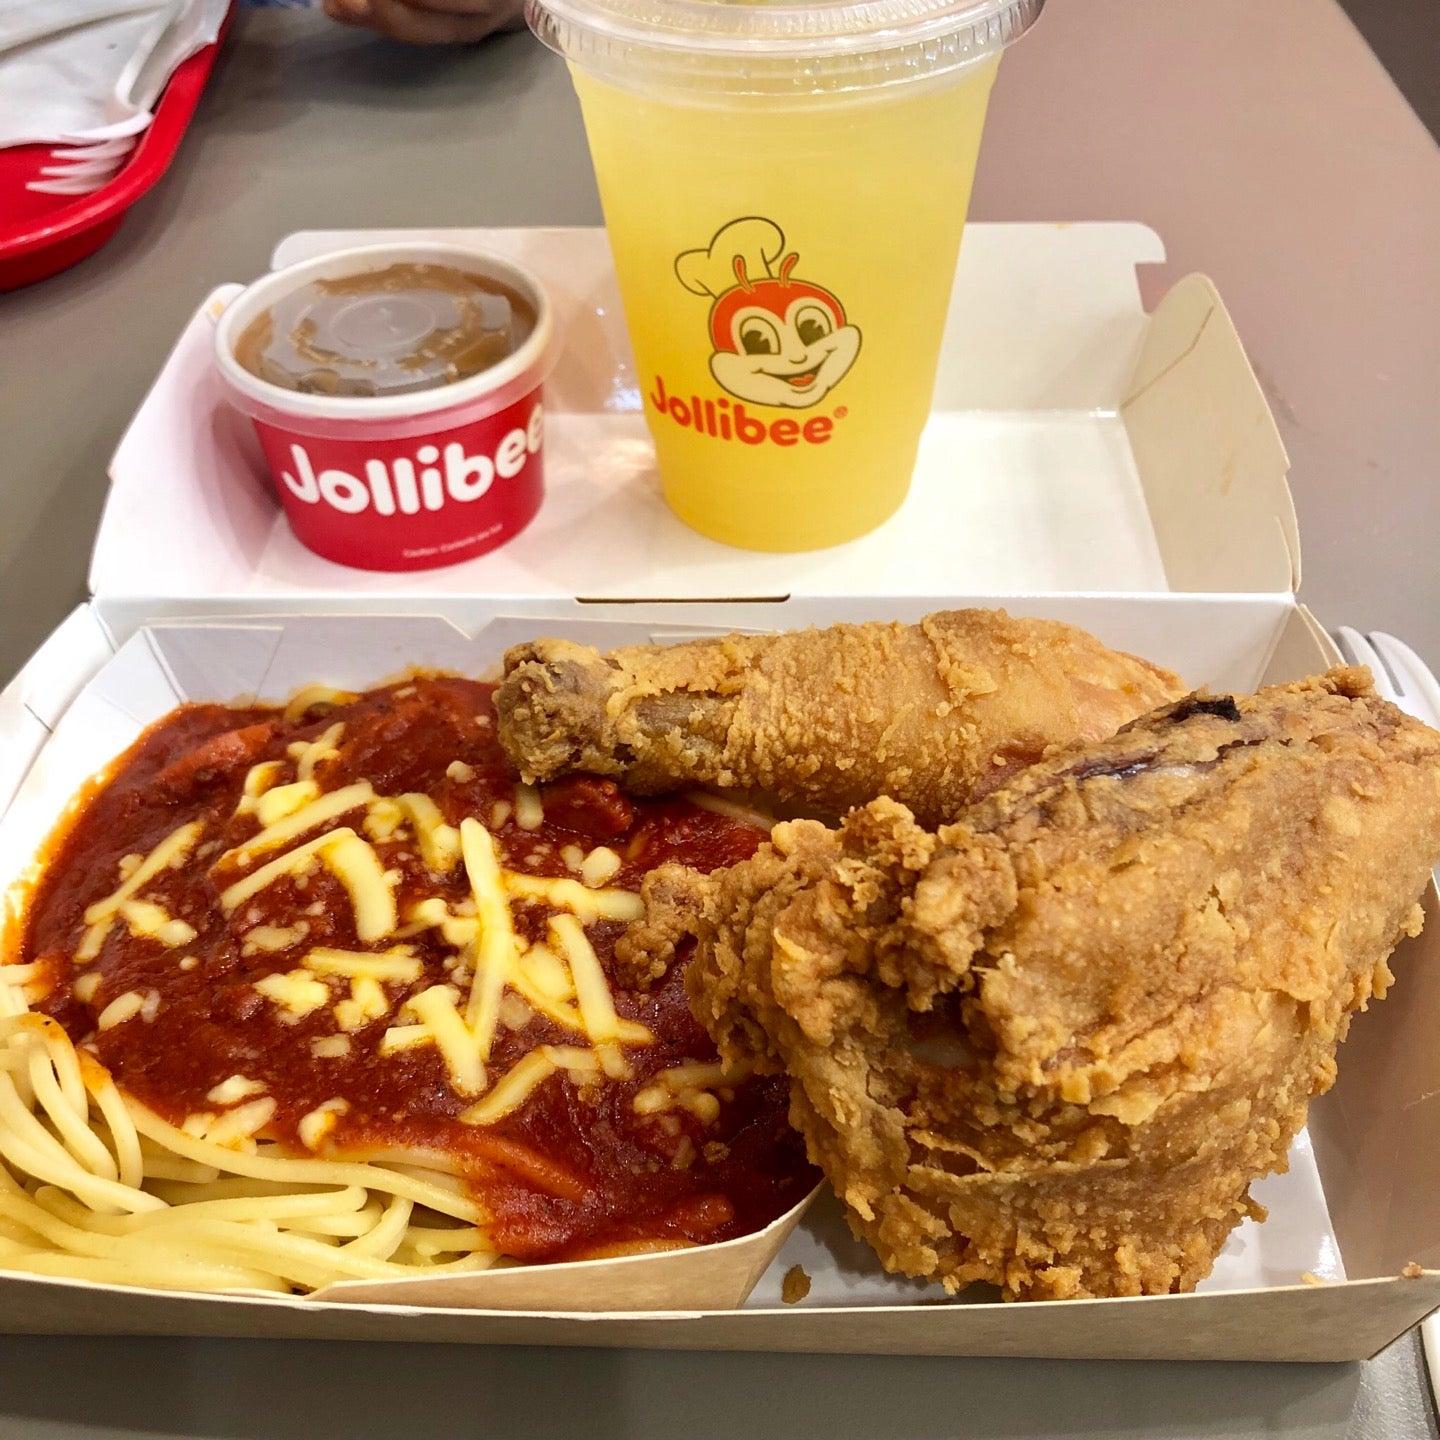 Jollibee 5033 N Elston Ave In Chicago Restaurant Menu And Reviews